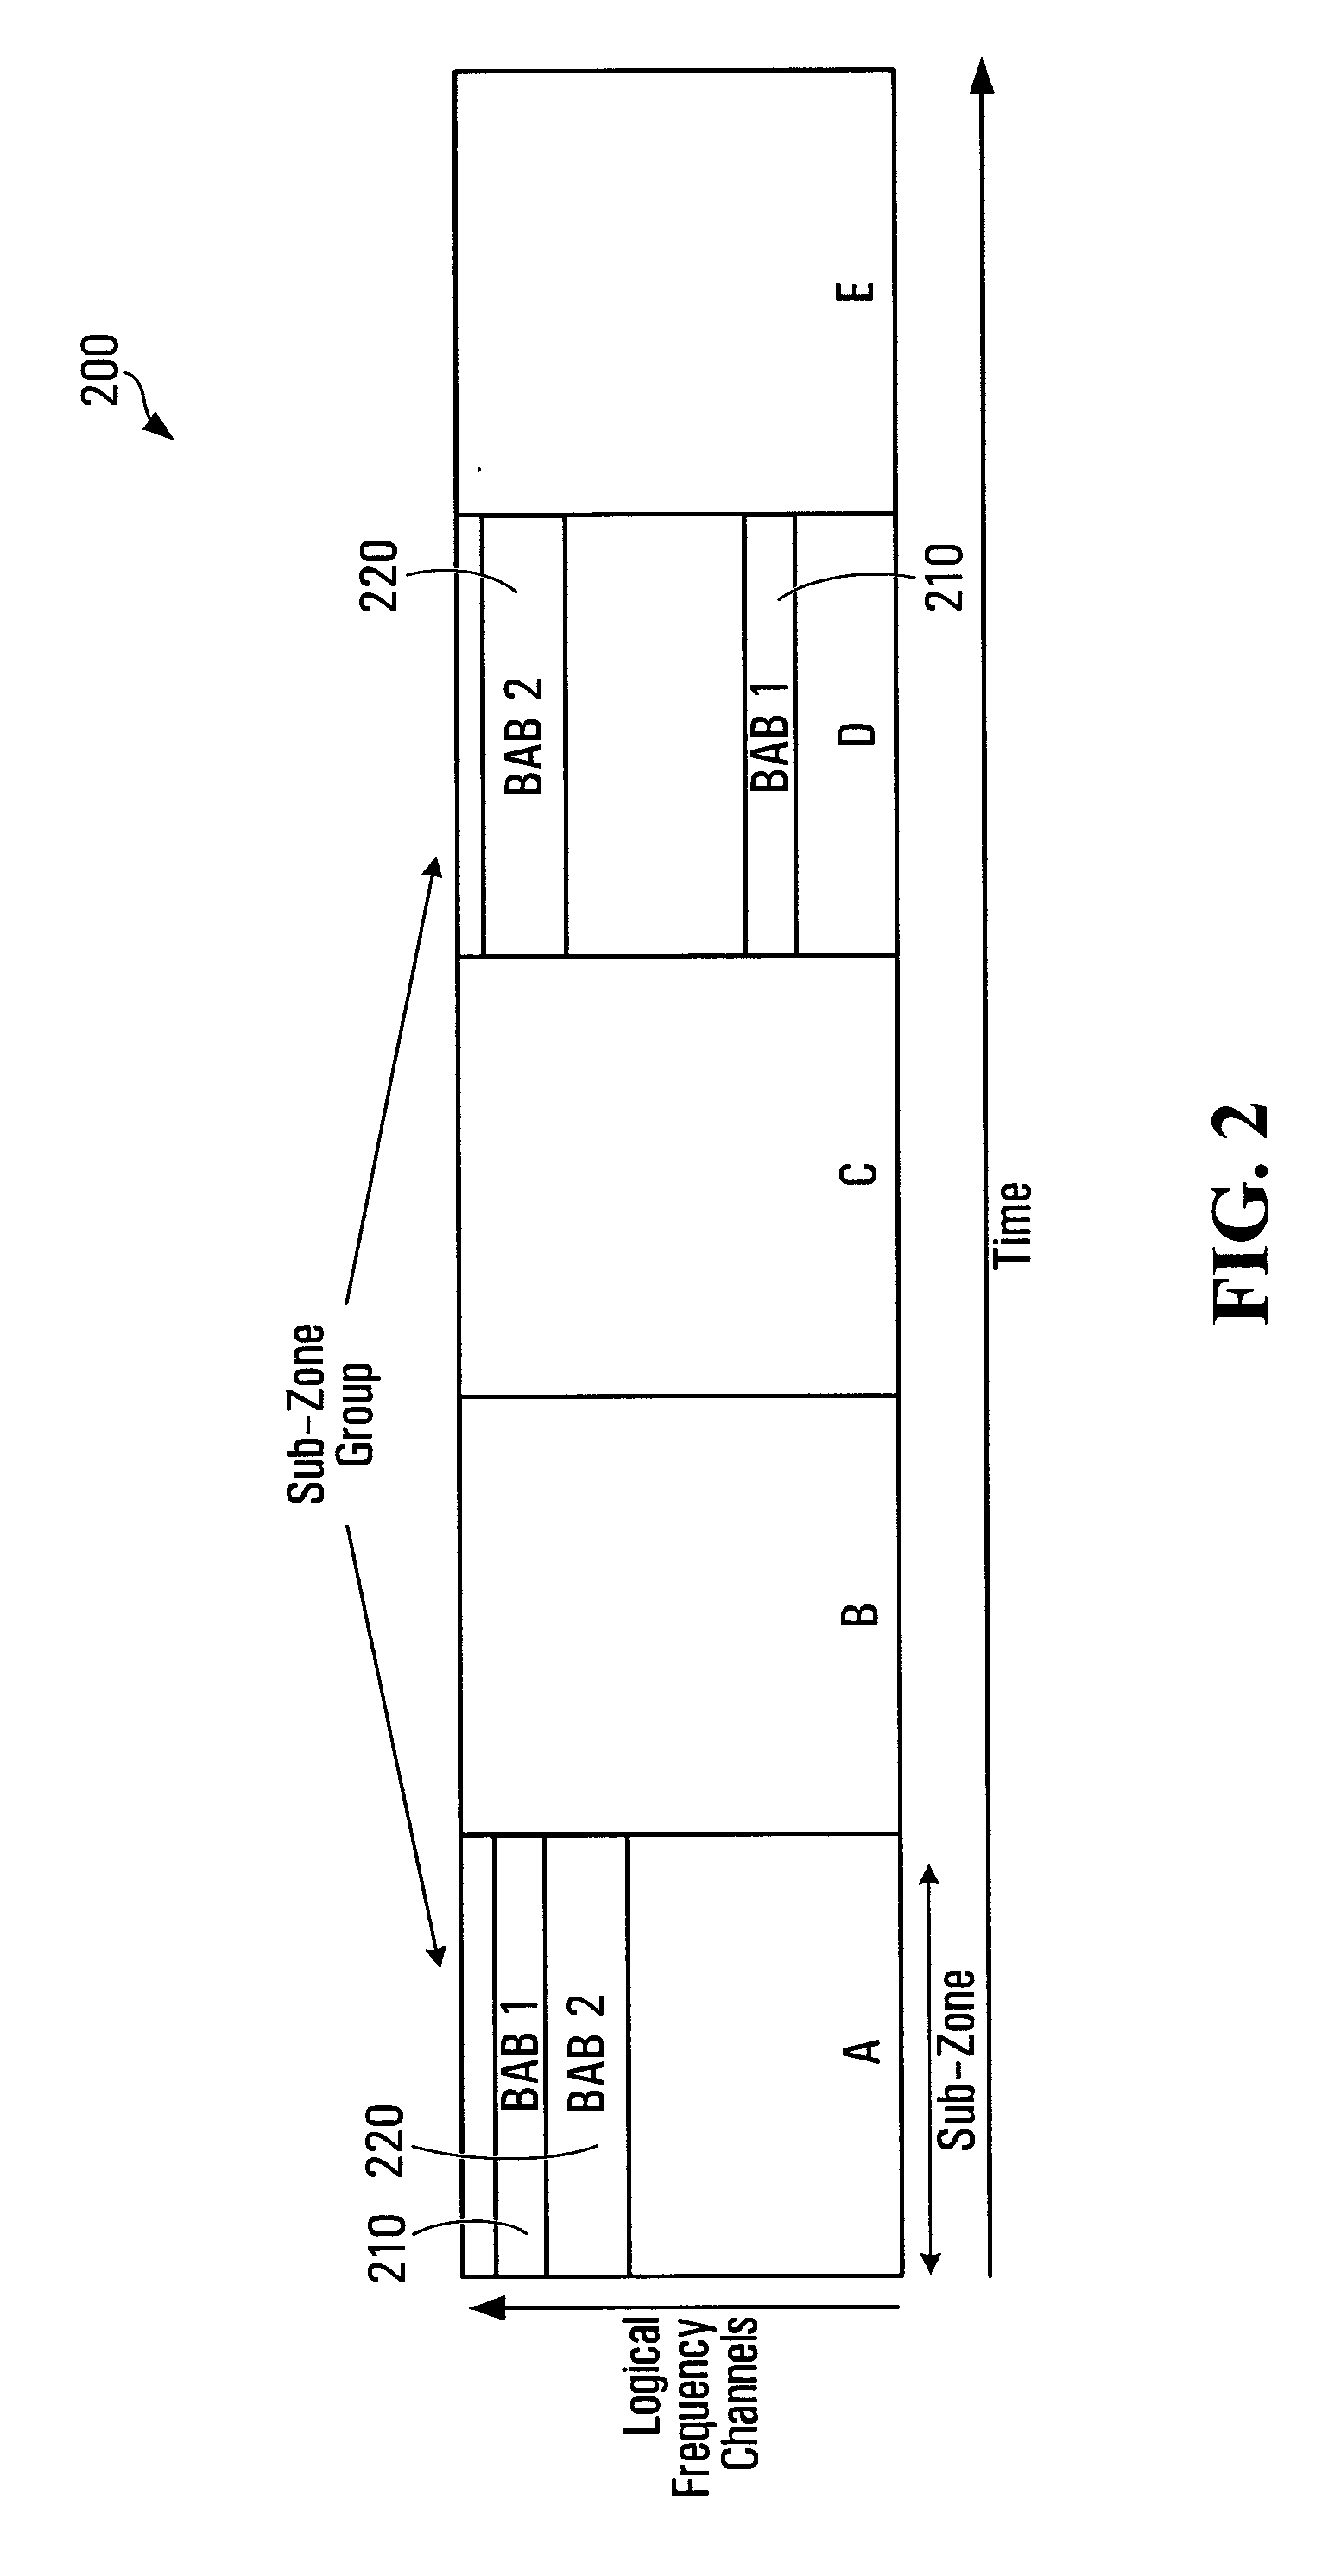 Methods and systems for resource allocation